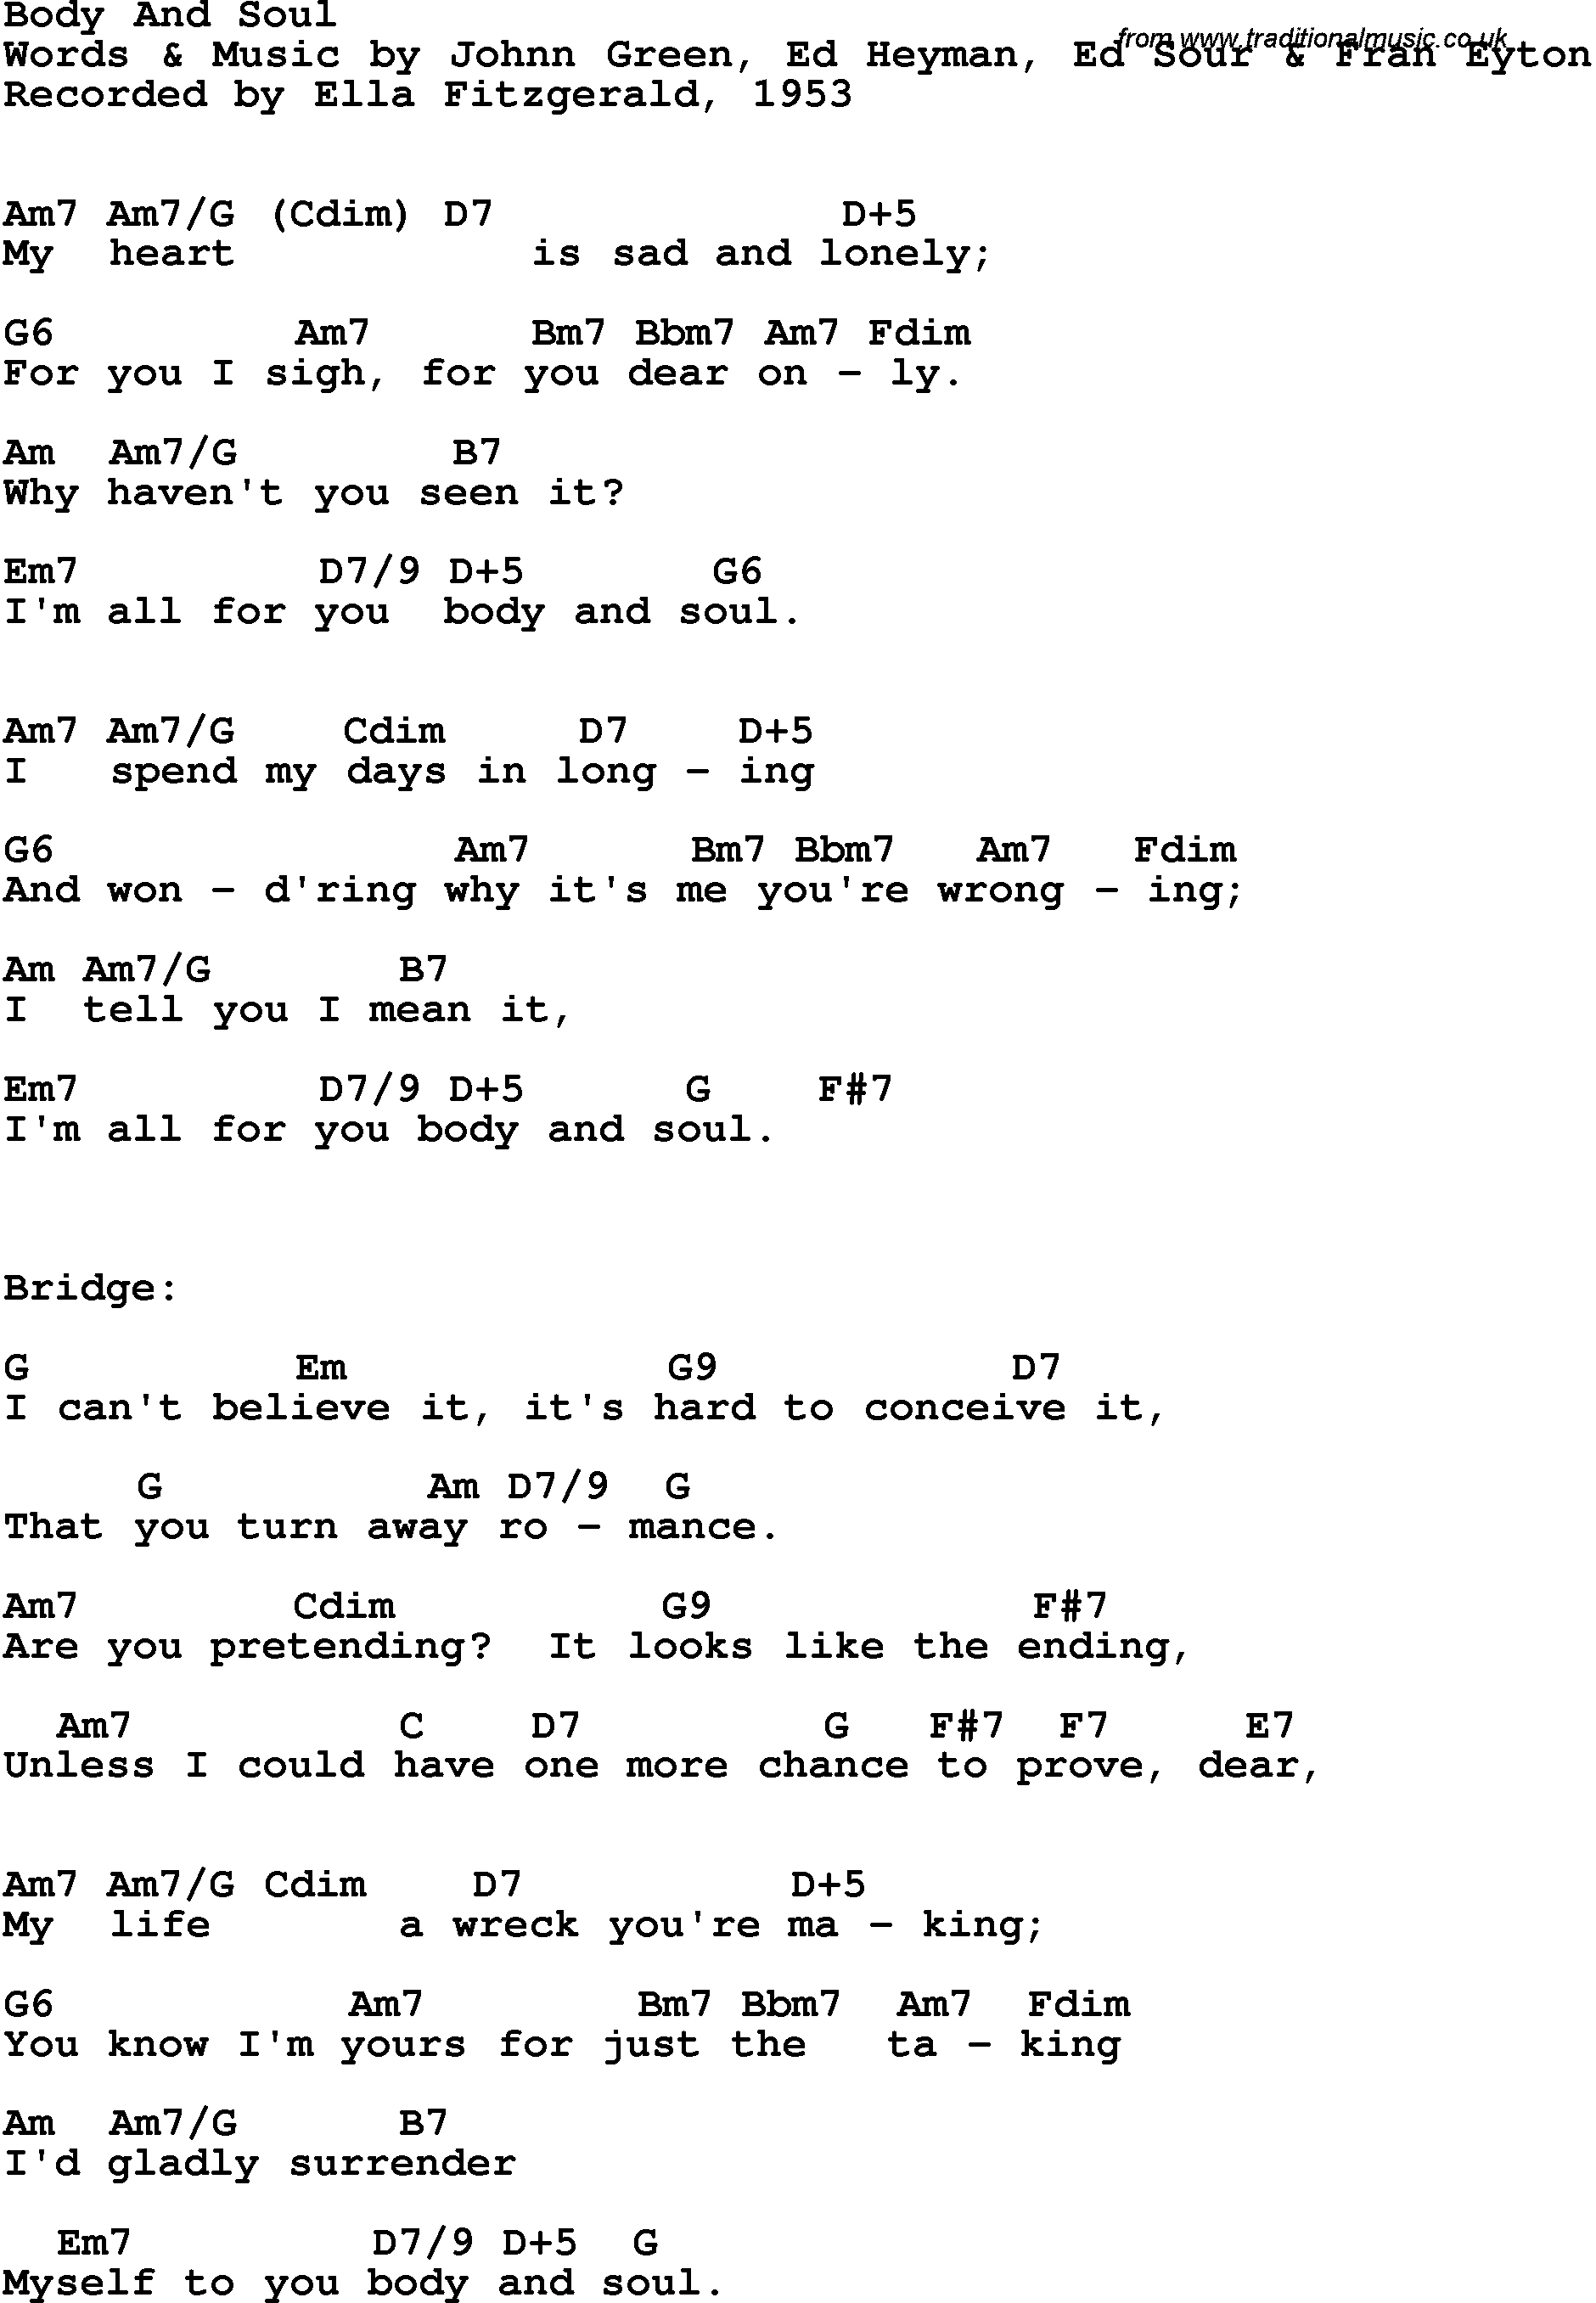 Song Lyrics with guitar chords for Body And Soul - Ella Fitzgerald, 1953